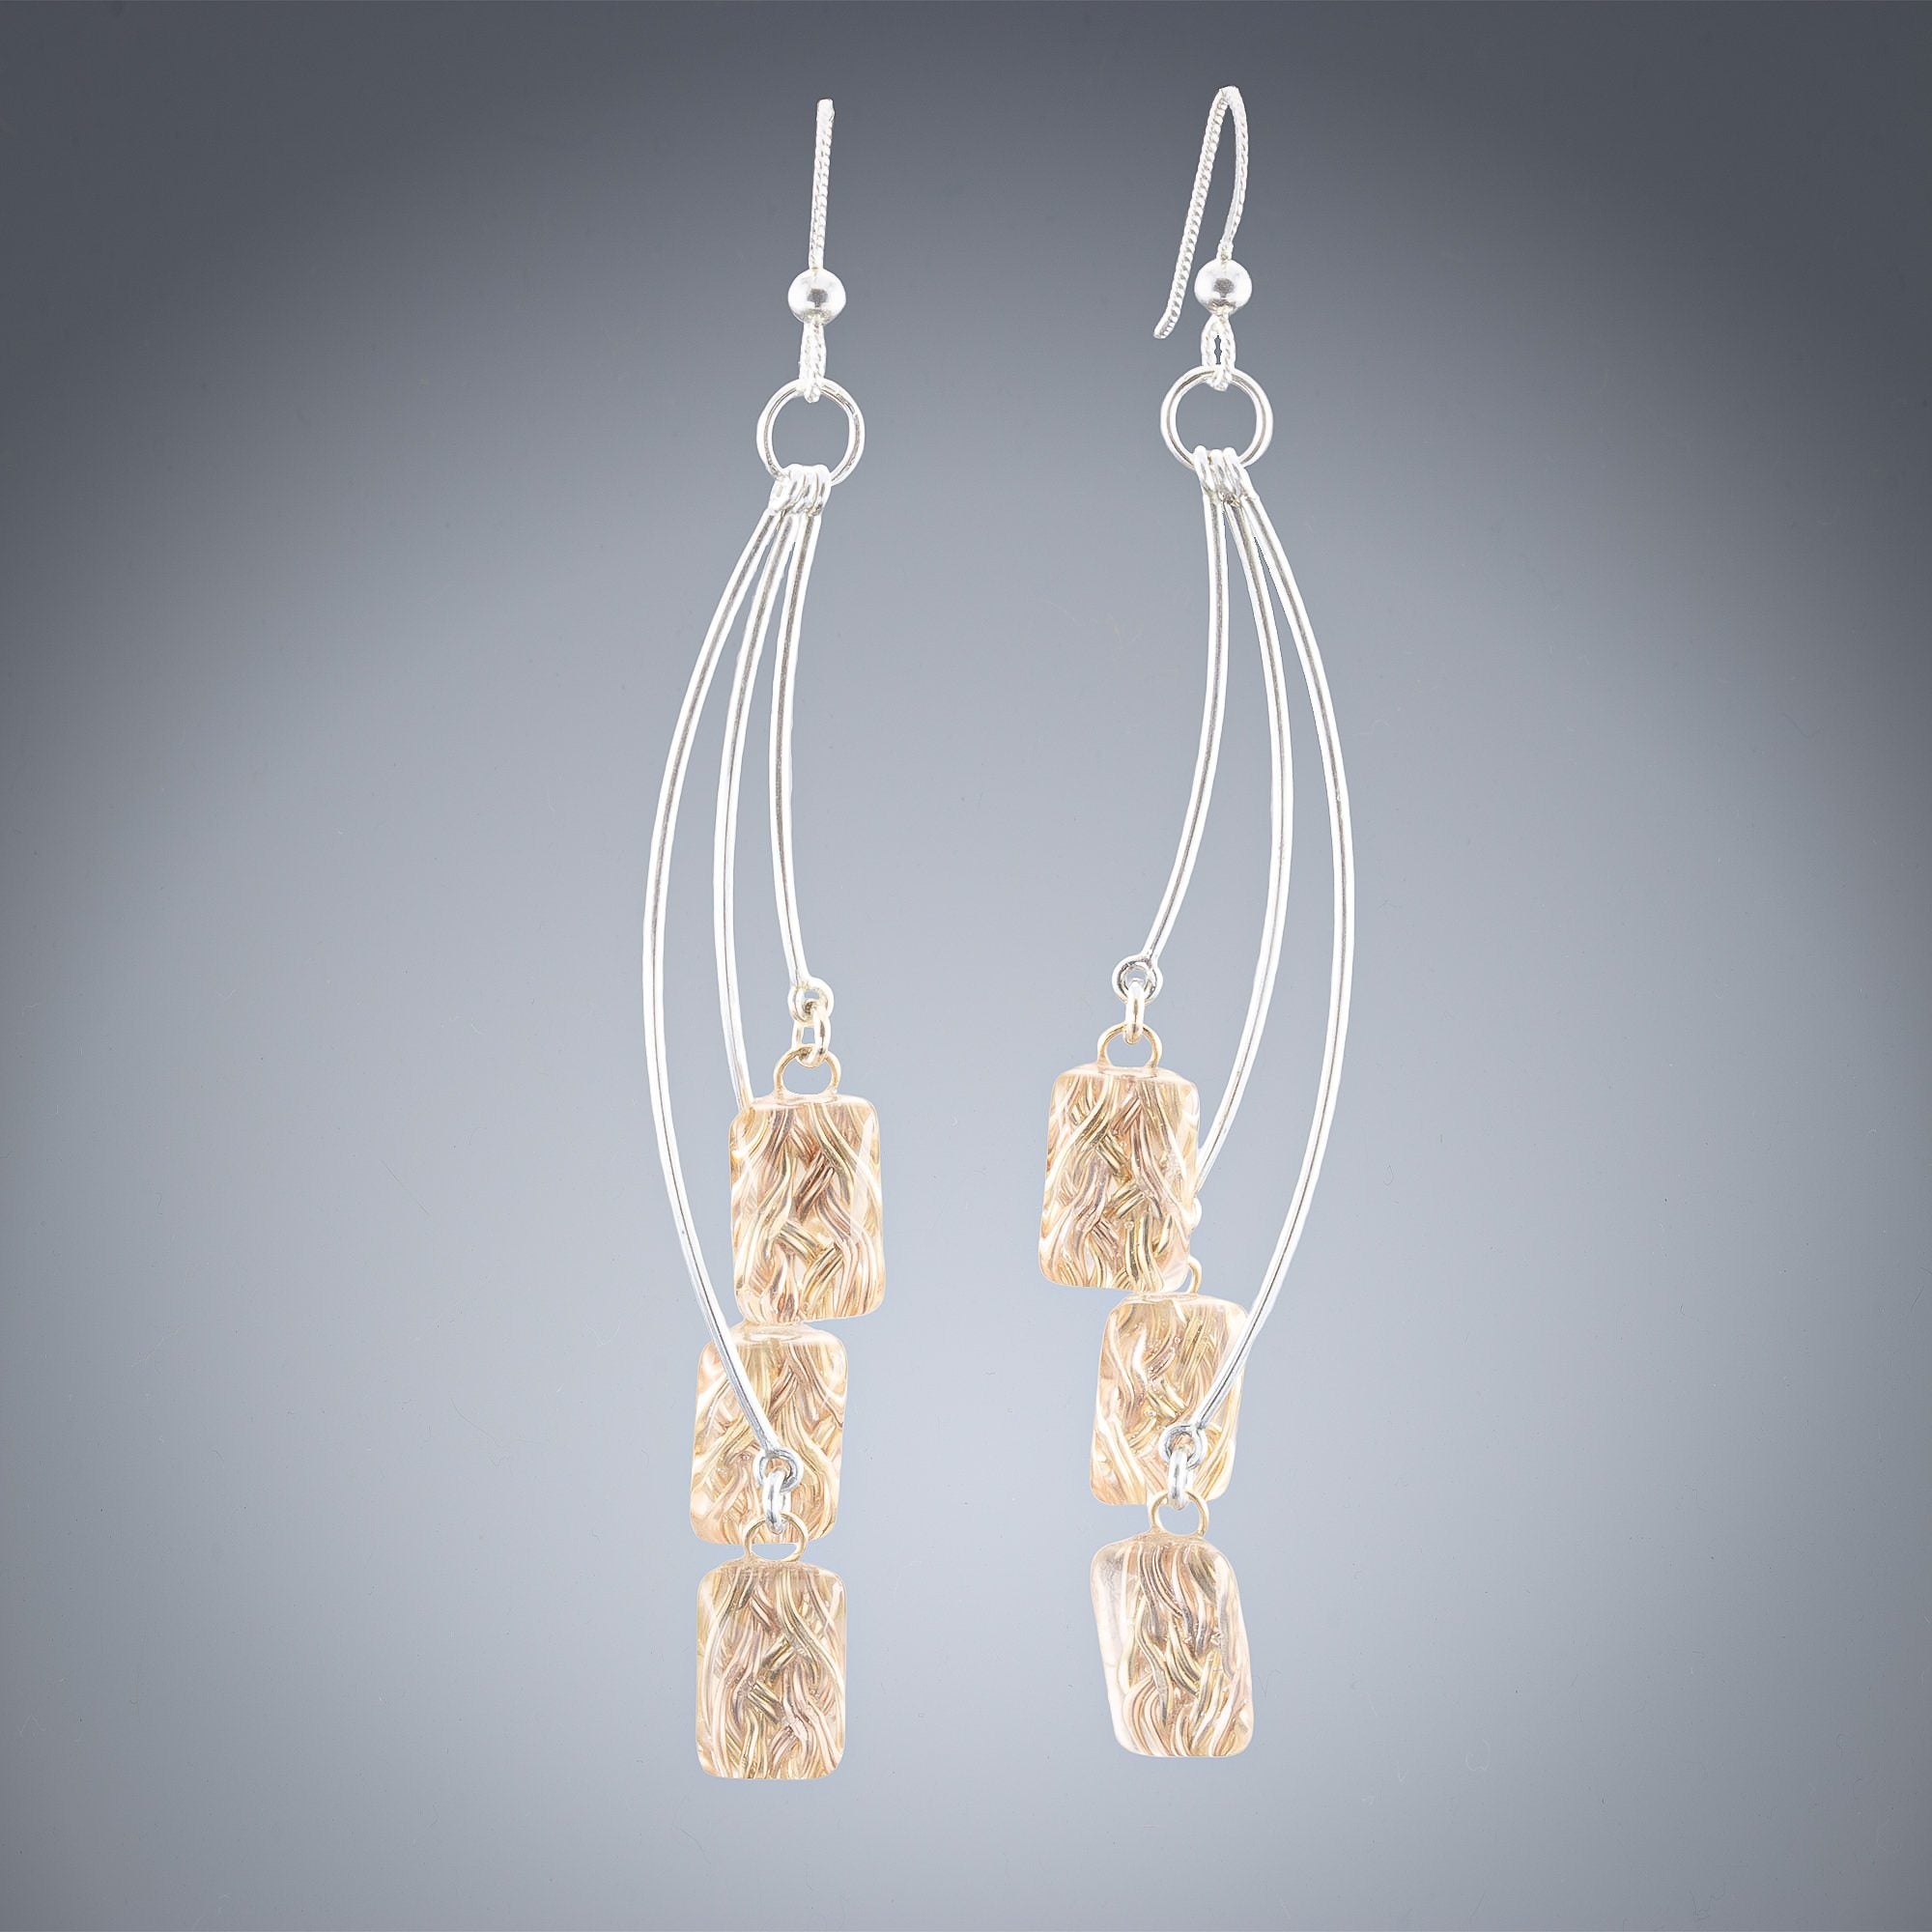 Sparkly Cascading Earrings with Handwoven Metal Fabric and Glass in 14K Yellow and Rose Gold Fill